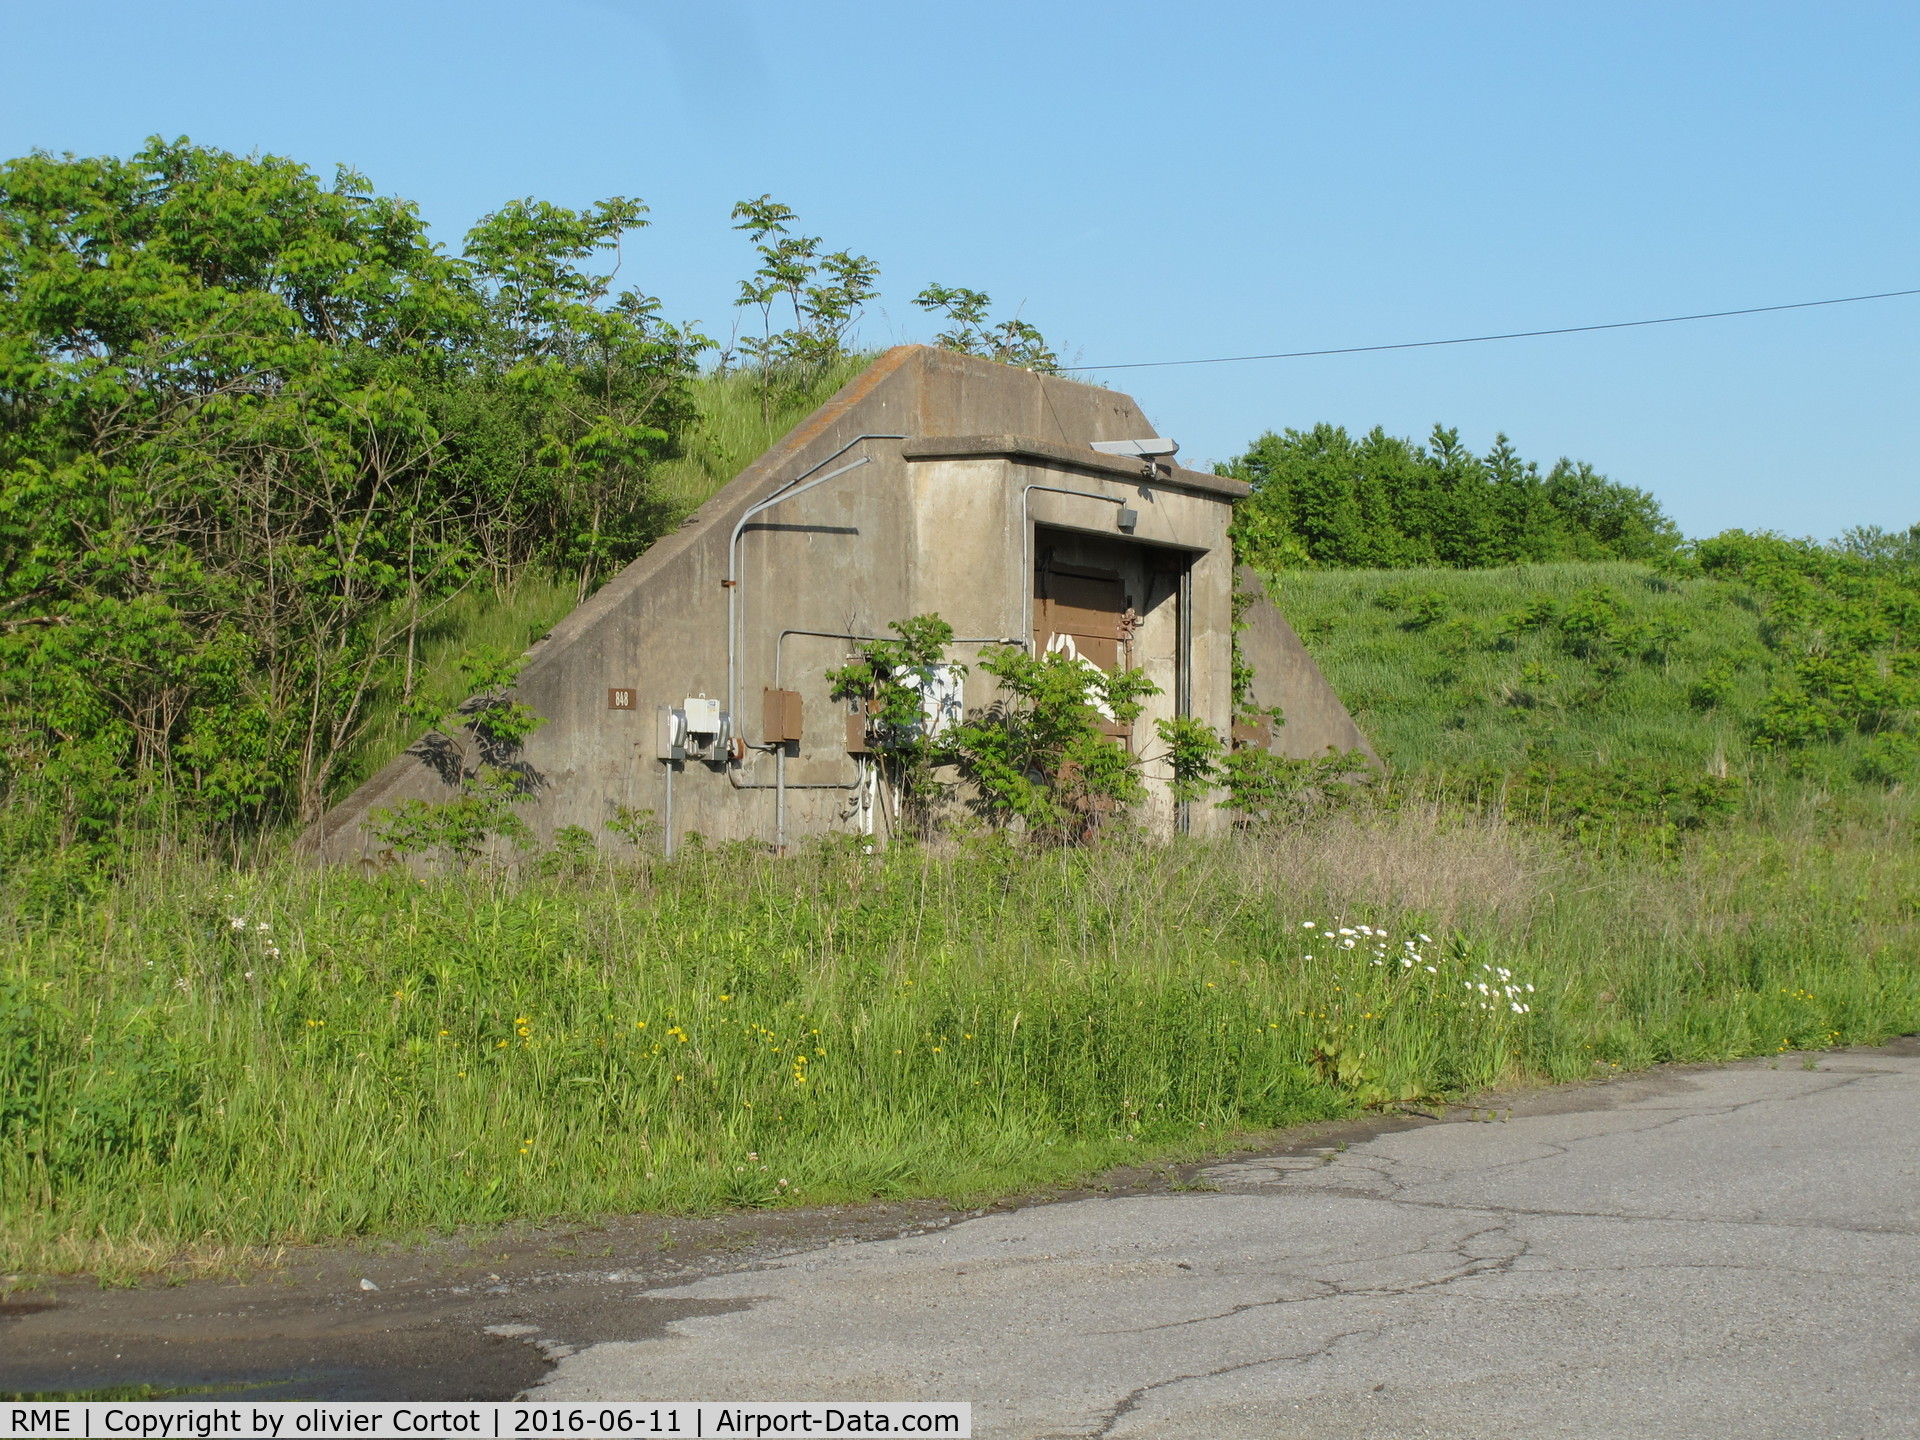 Griffiss International Airport (RME) - on the other side of the runway, you'll find ammo shelters of the former Air force base.